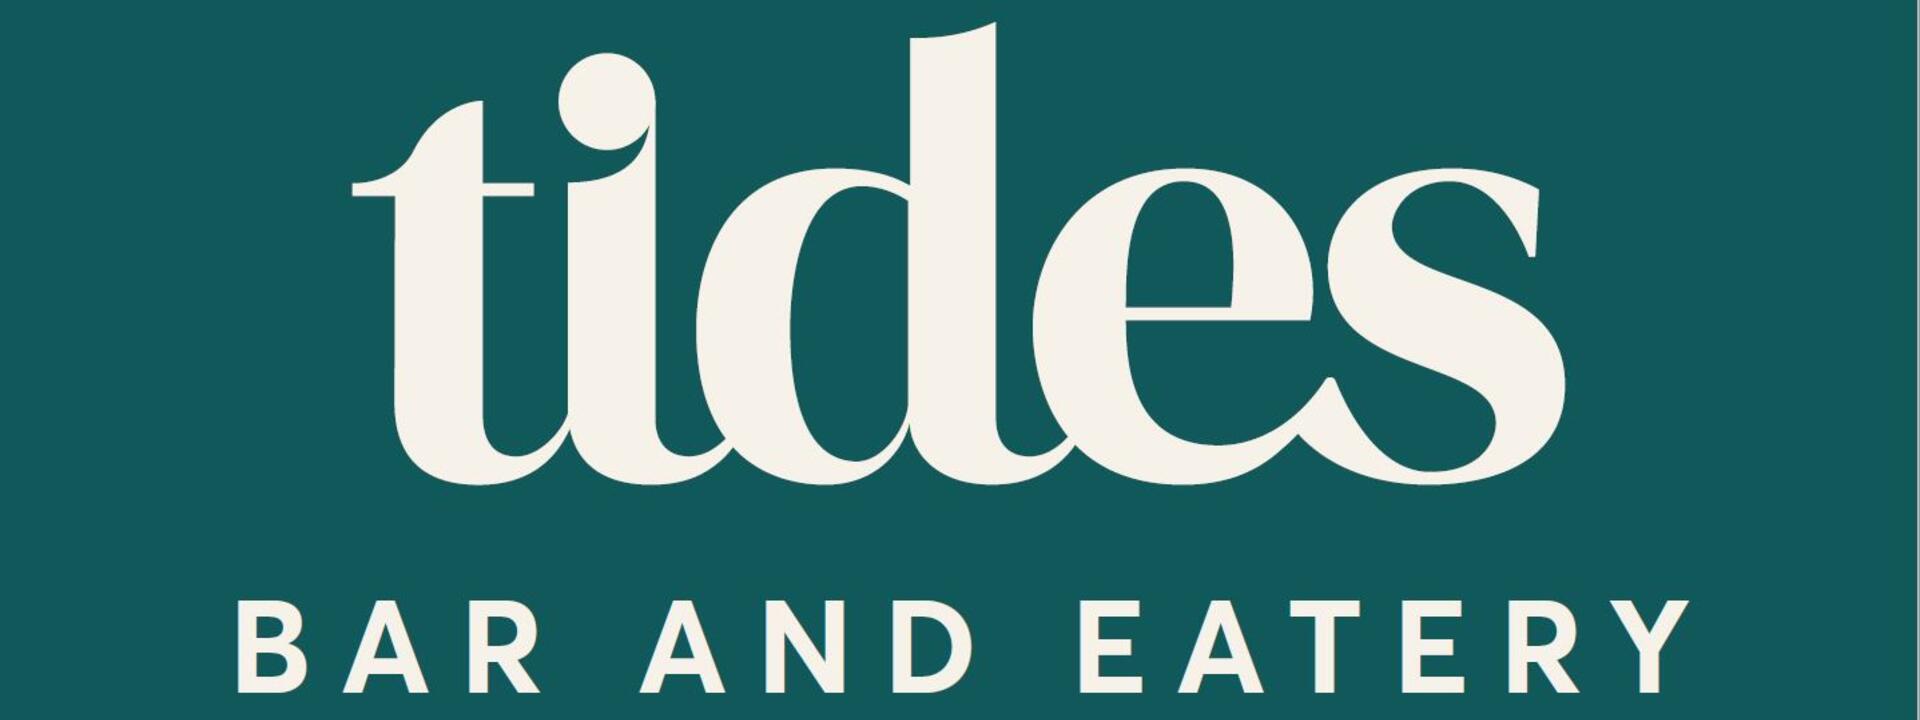 Tides Bar and Eatery - green background.JPG